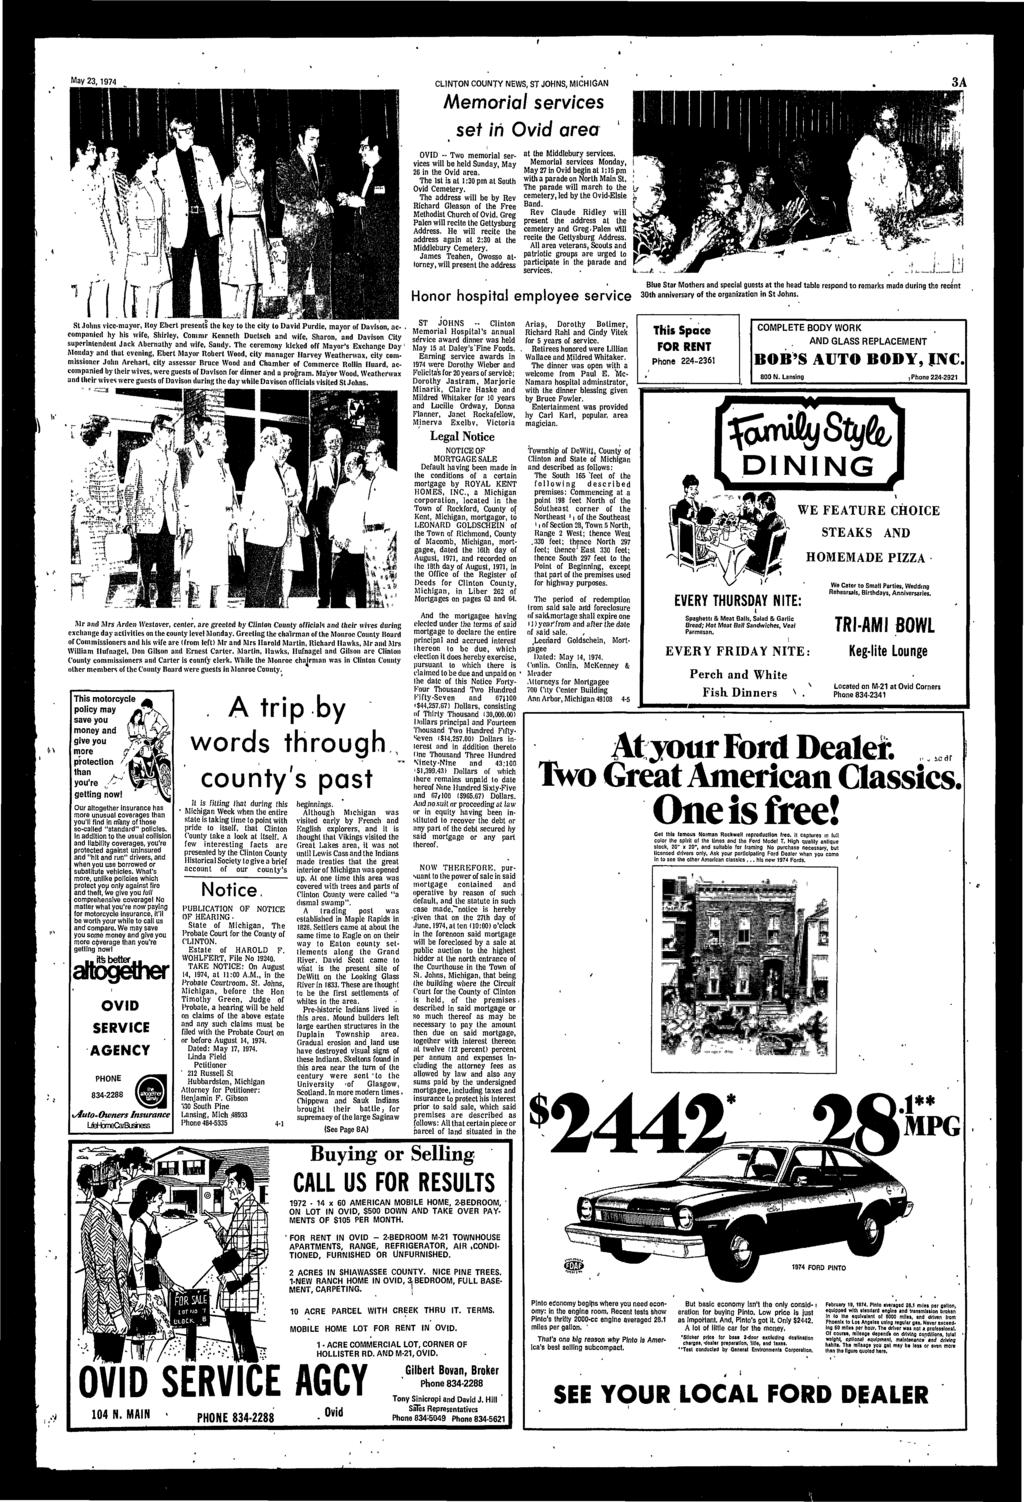 May 23,1974 CLINTON COUNTY NEWS, ST JOHNS, MICHIGAN Memoral servces set n Ovd area OVID - Two memoral servces wll be held Sunday, May 26 n the Ovd area. The 1st s at 1:30 pm at South Ovd Cemetery.